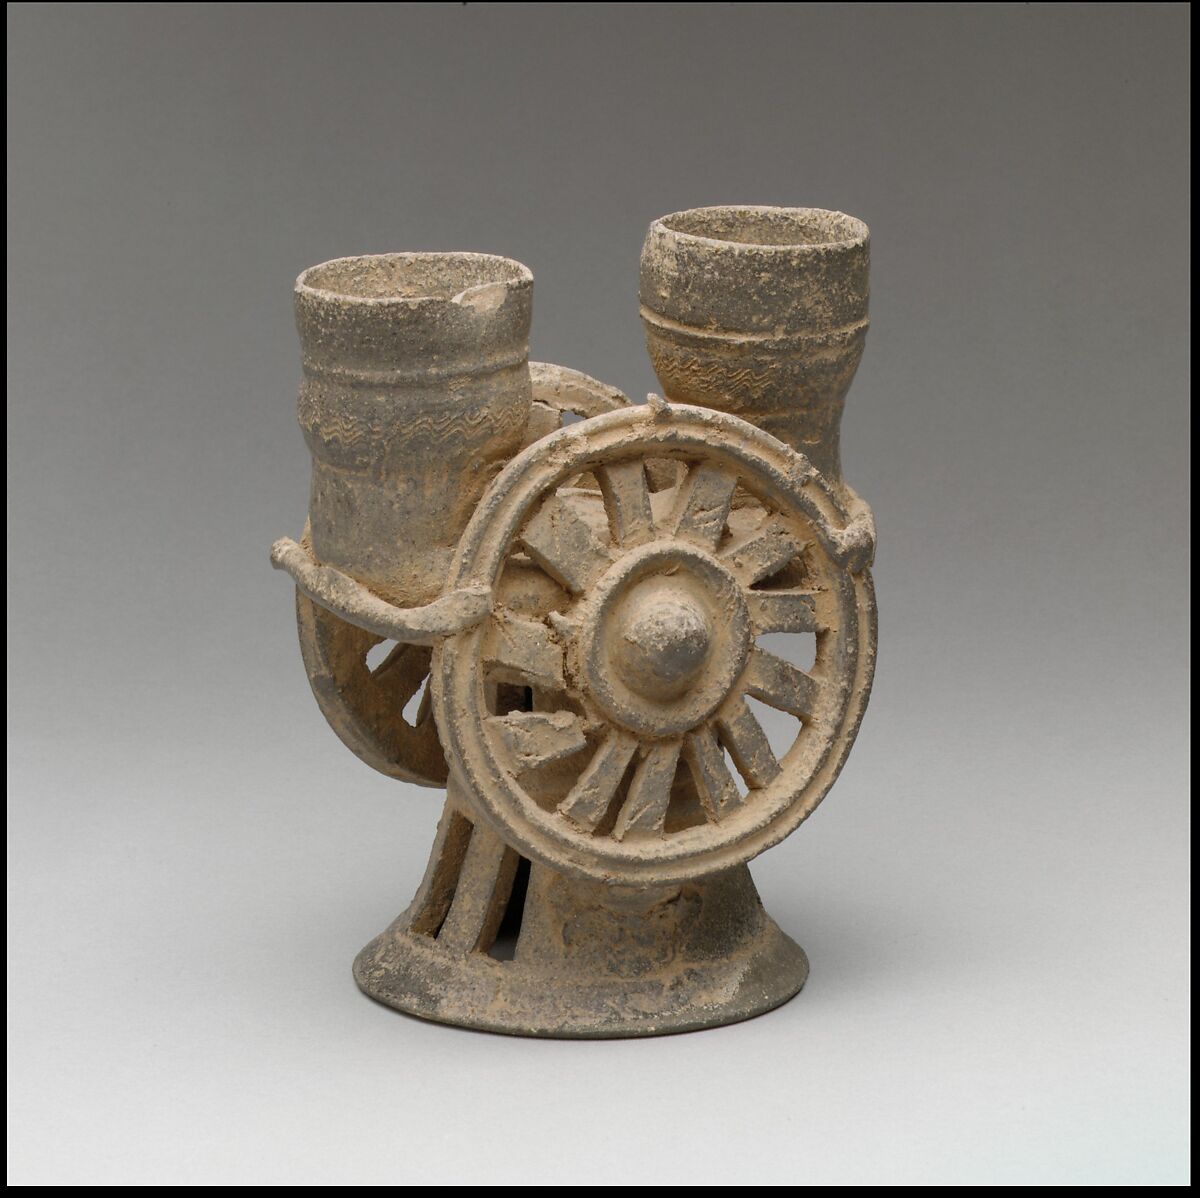 Chariot wheel-shaped cup, Stoneware with incidental ash glaze, Korea 